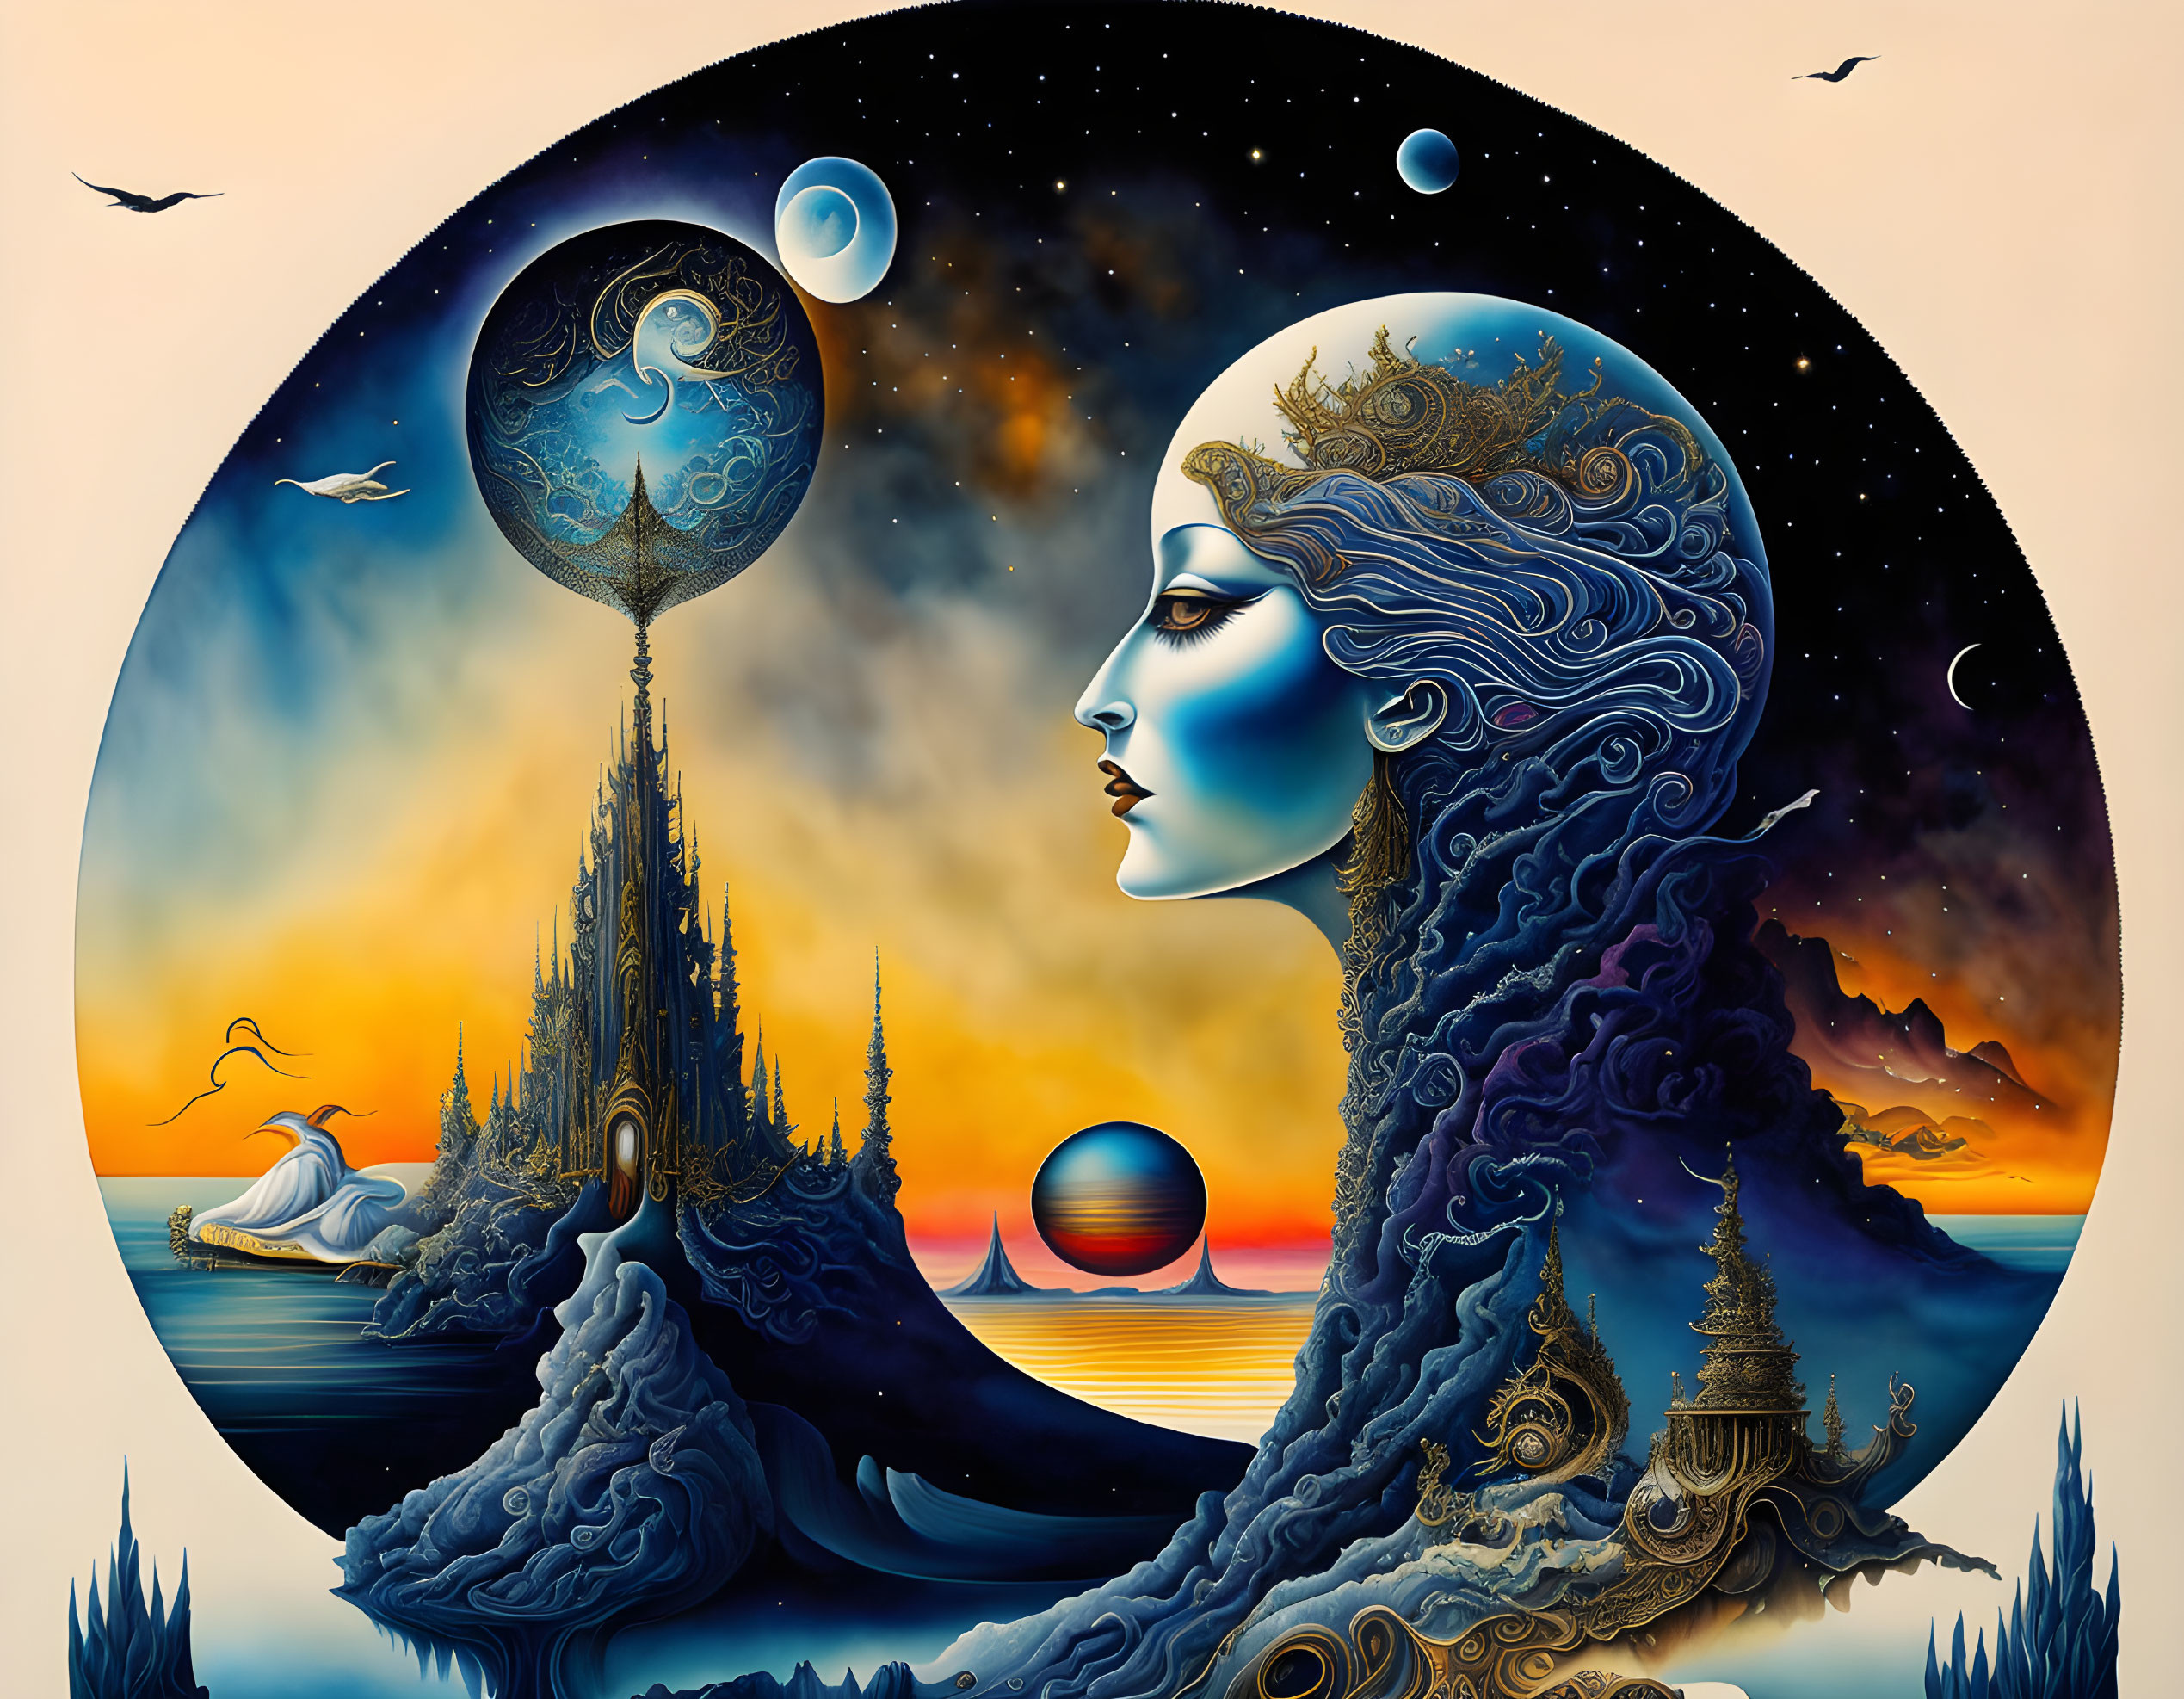 Surreal cosmic and oceanic themed woman's profile illustration